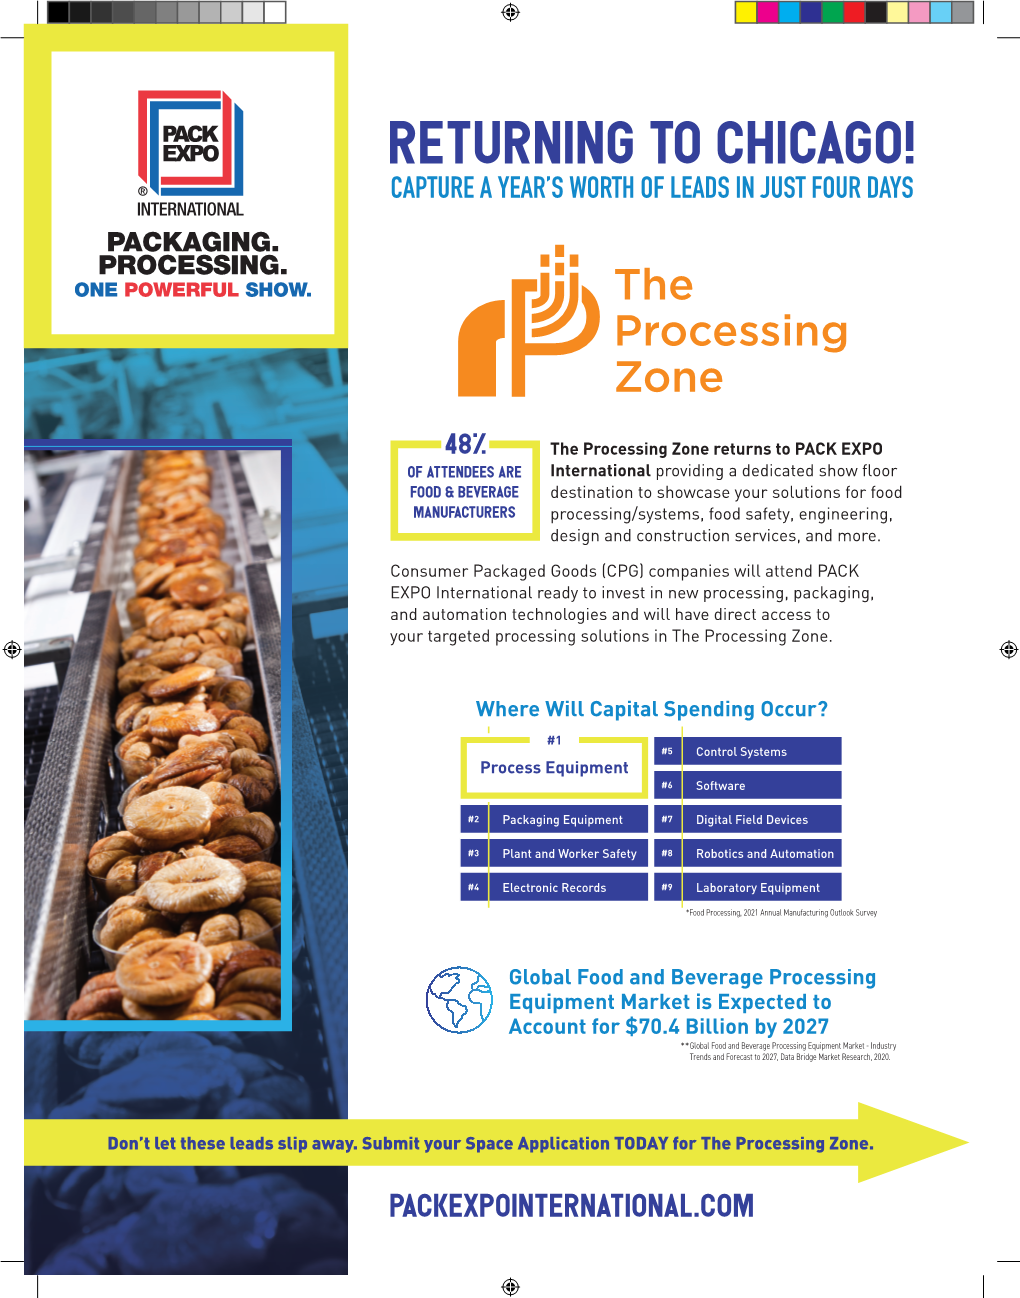 Processing Zone Returns to Chicago